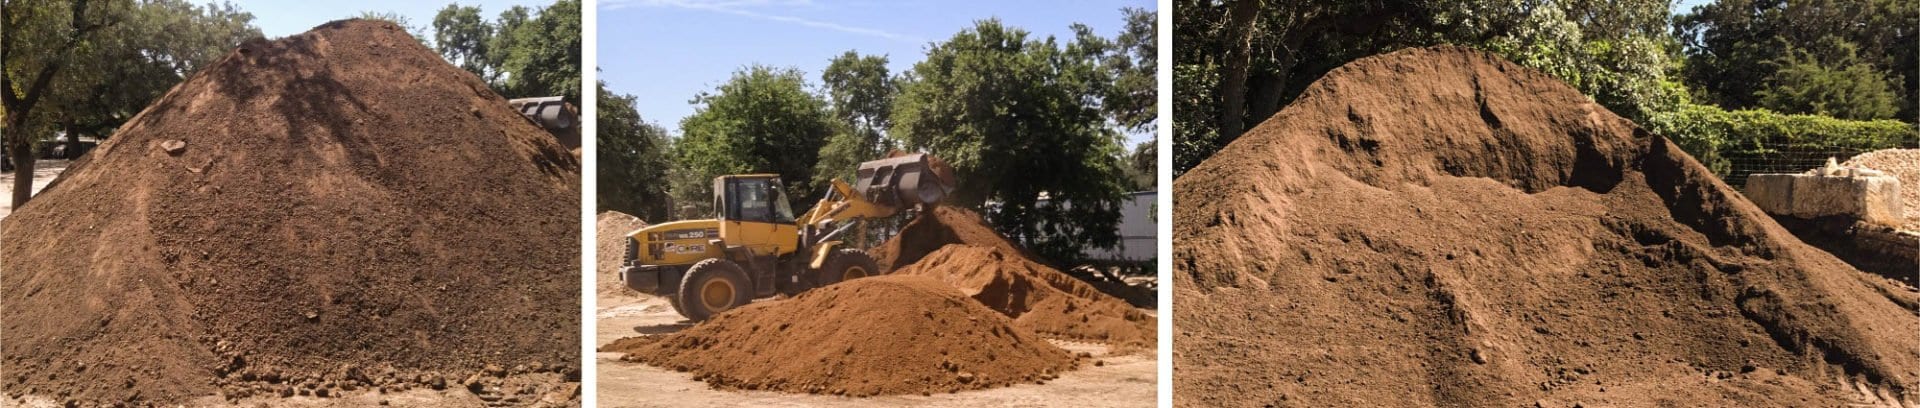 Home Texas Soil And Stone Outfitters, Landscaping Supplies San Antonio Tx